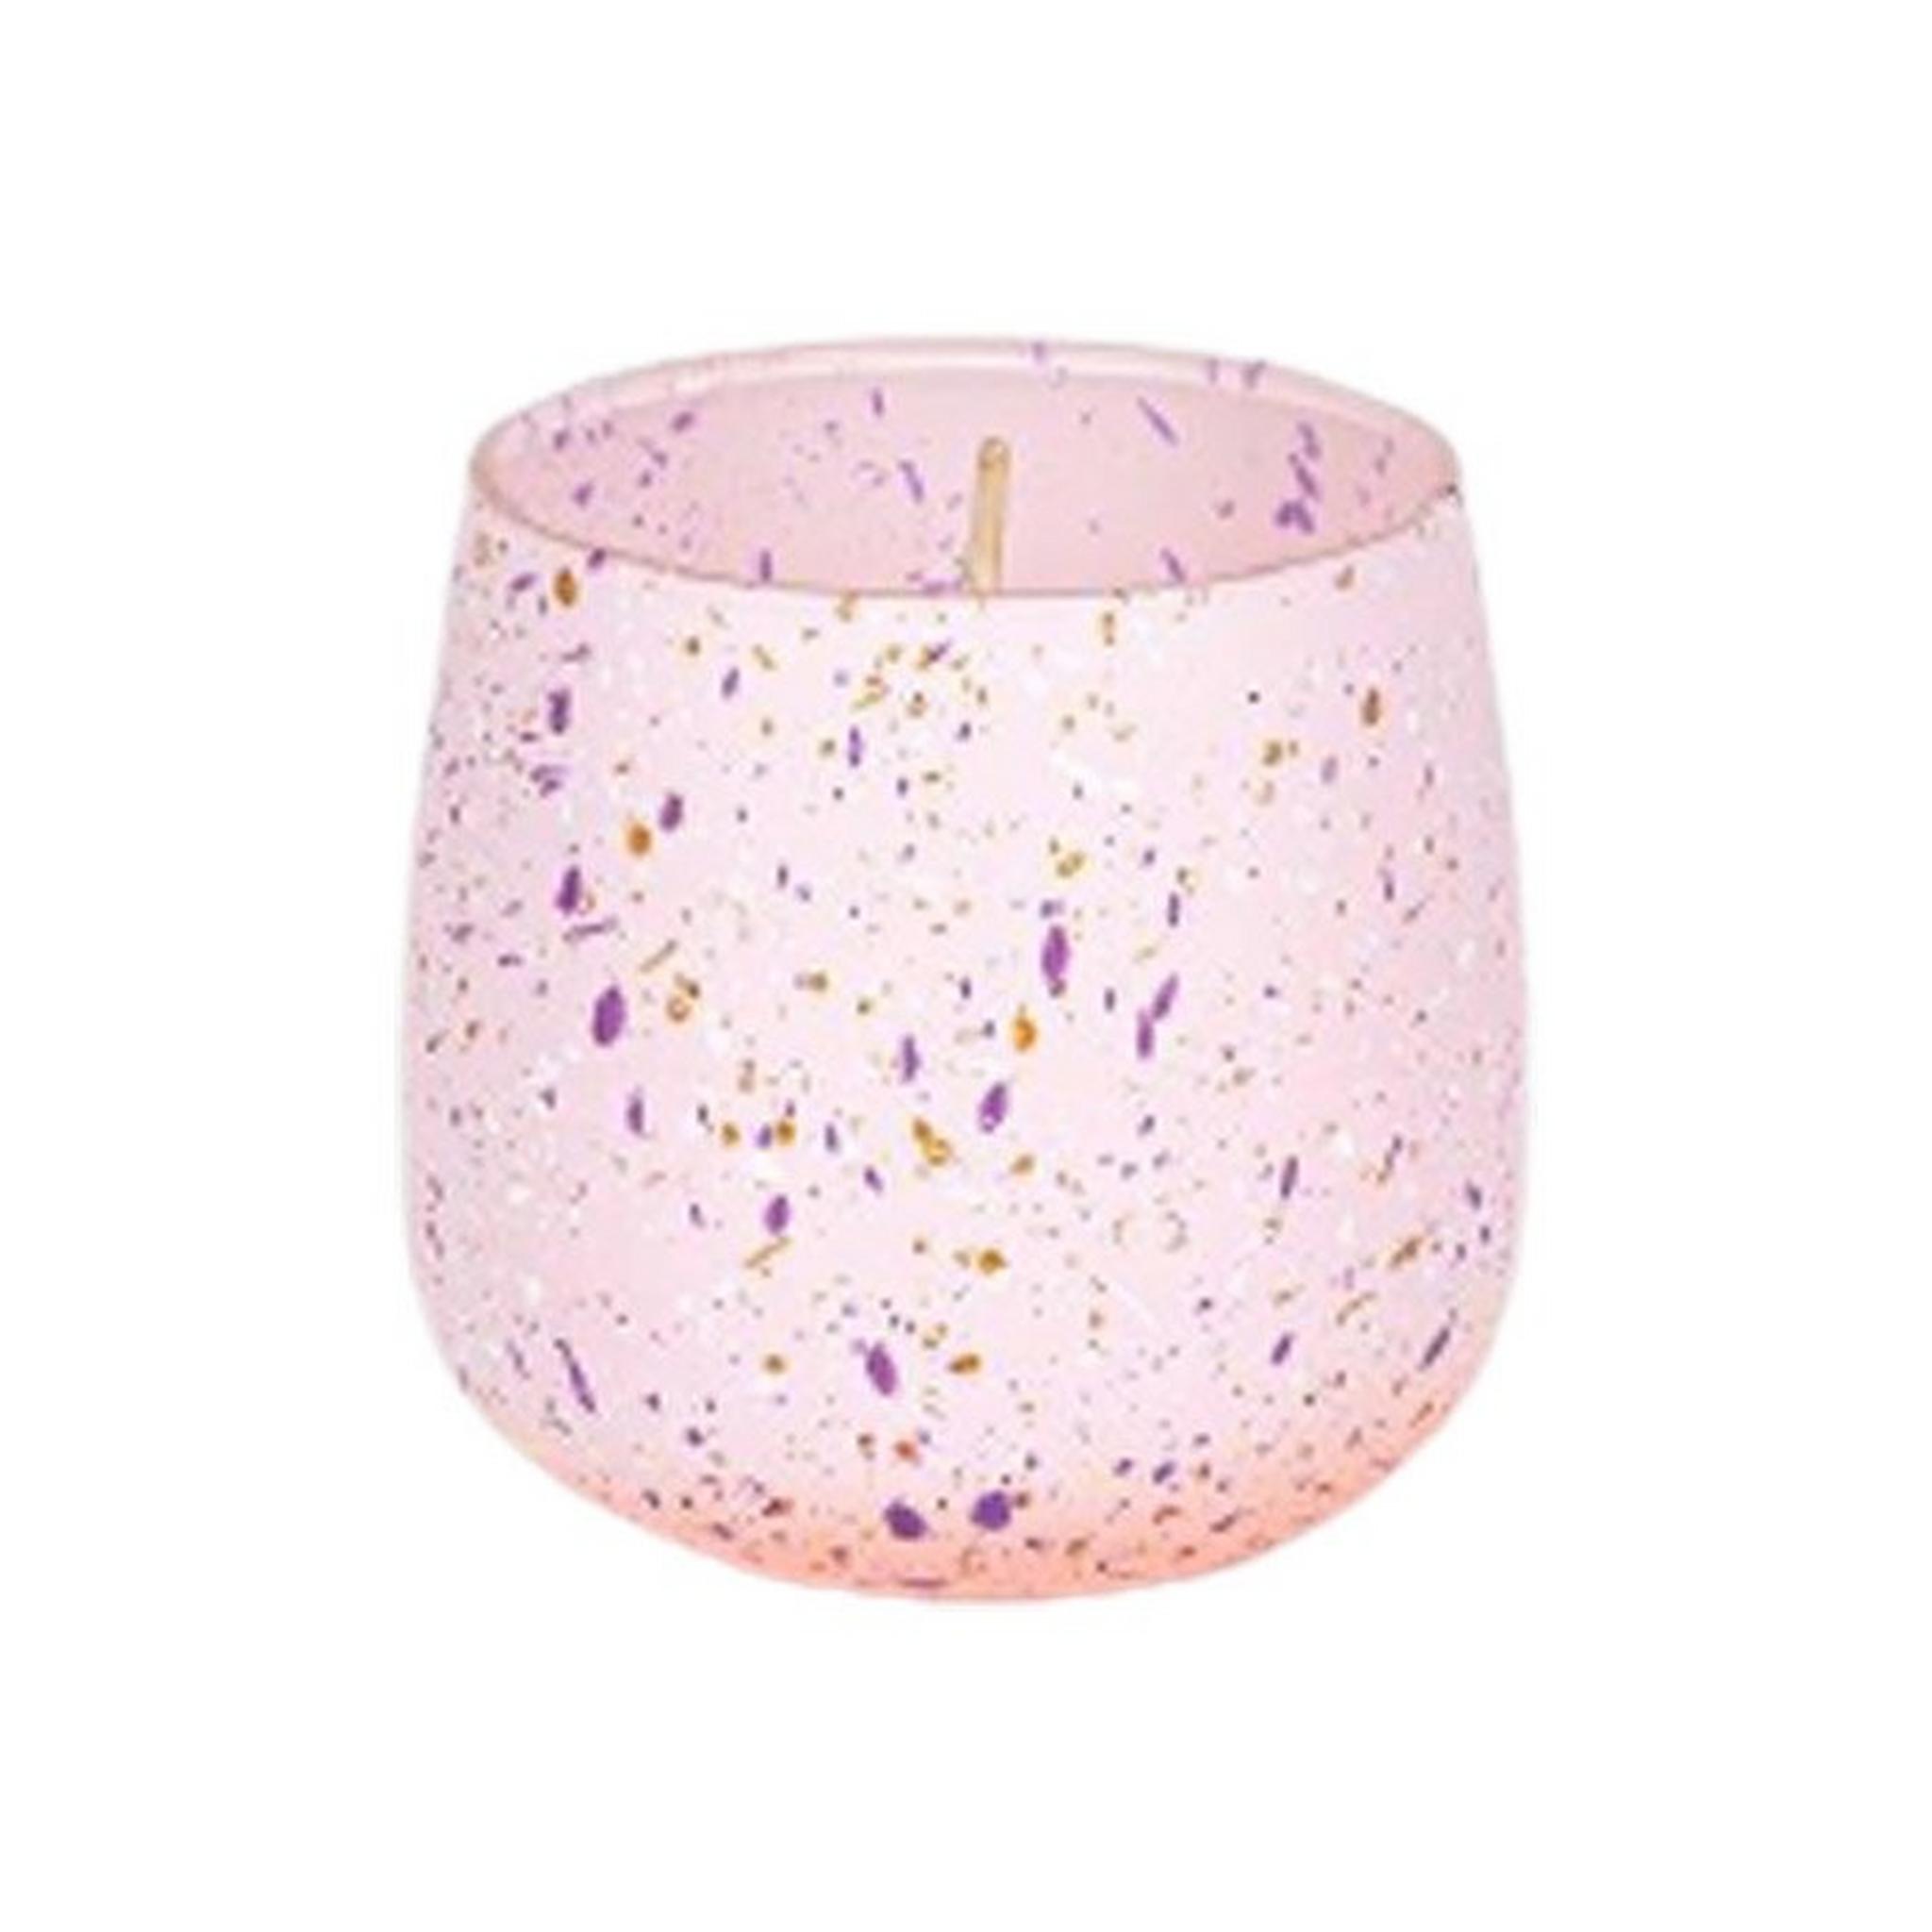 Soft Linen Candle 122g - Pink